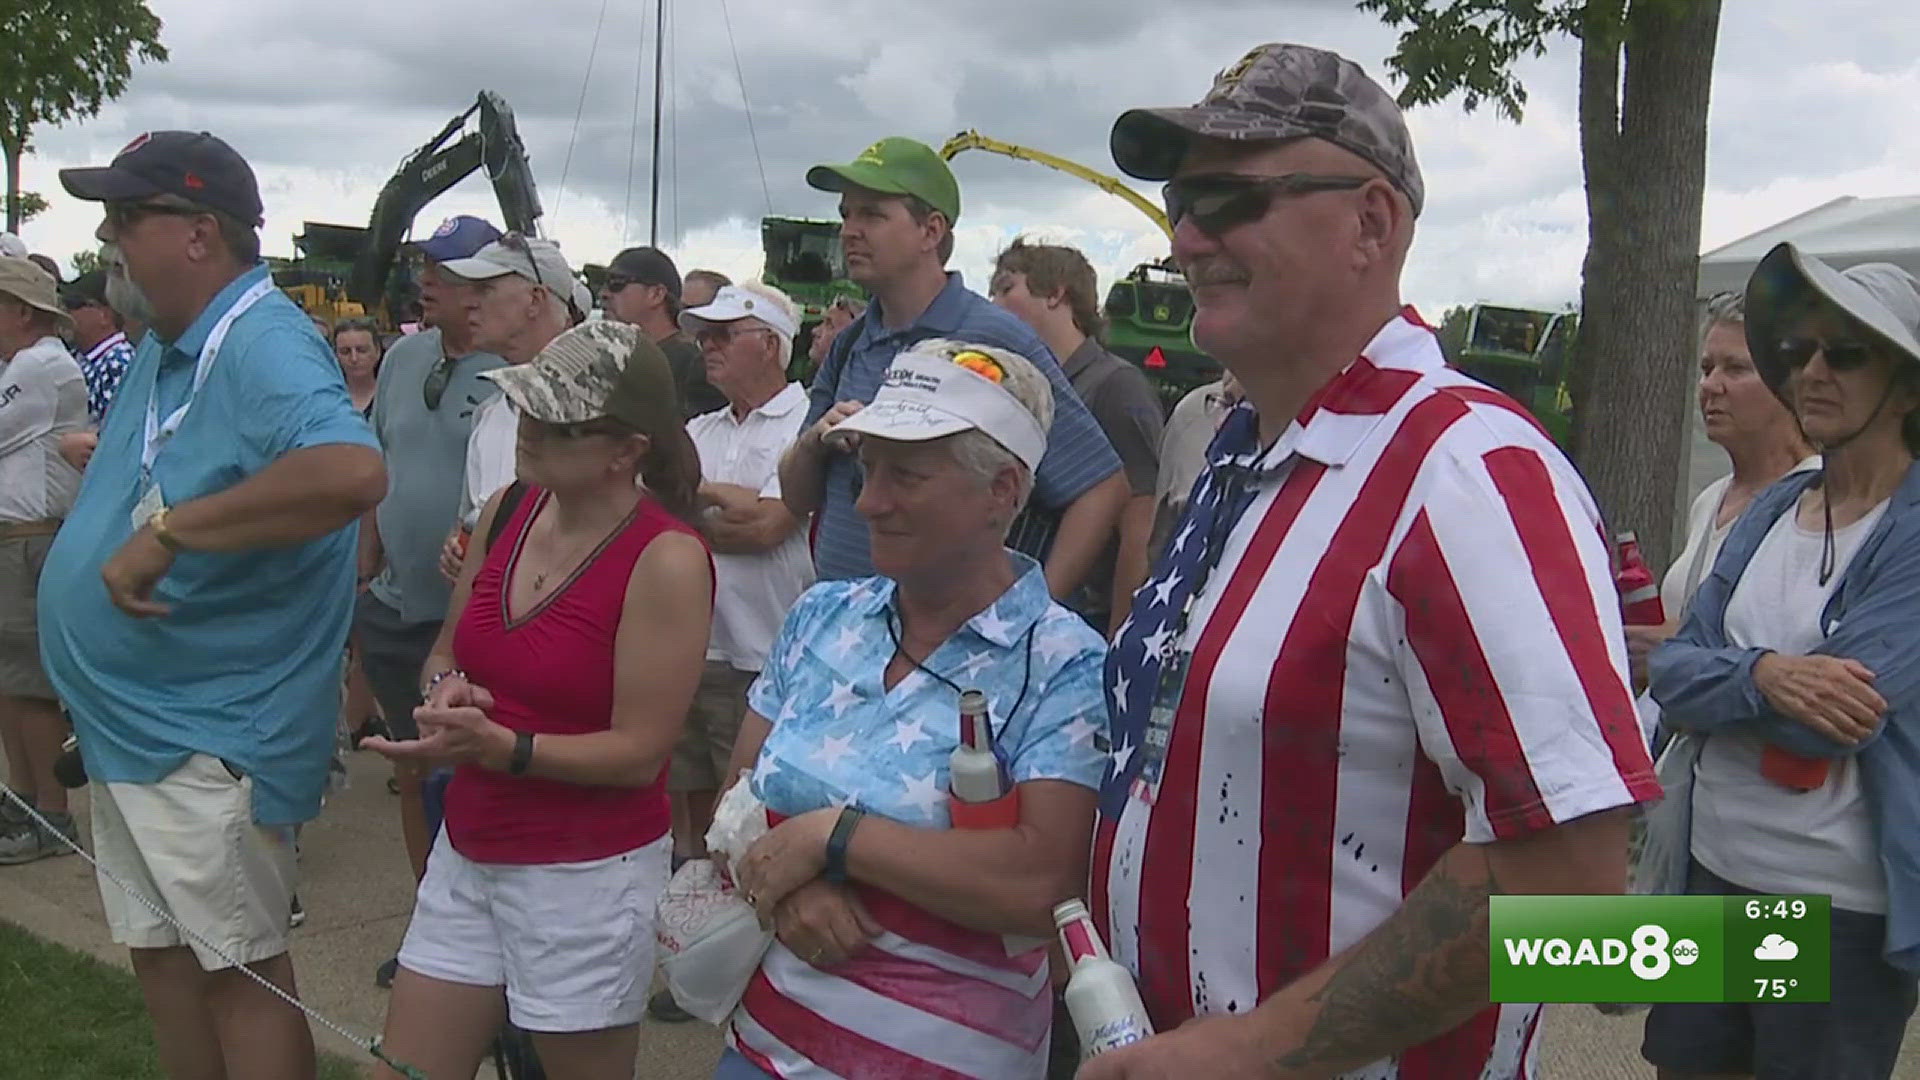 Both are veterans and celebrated their trip to the JDC with matching red, white and blue outfits.